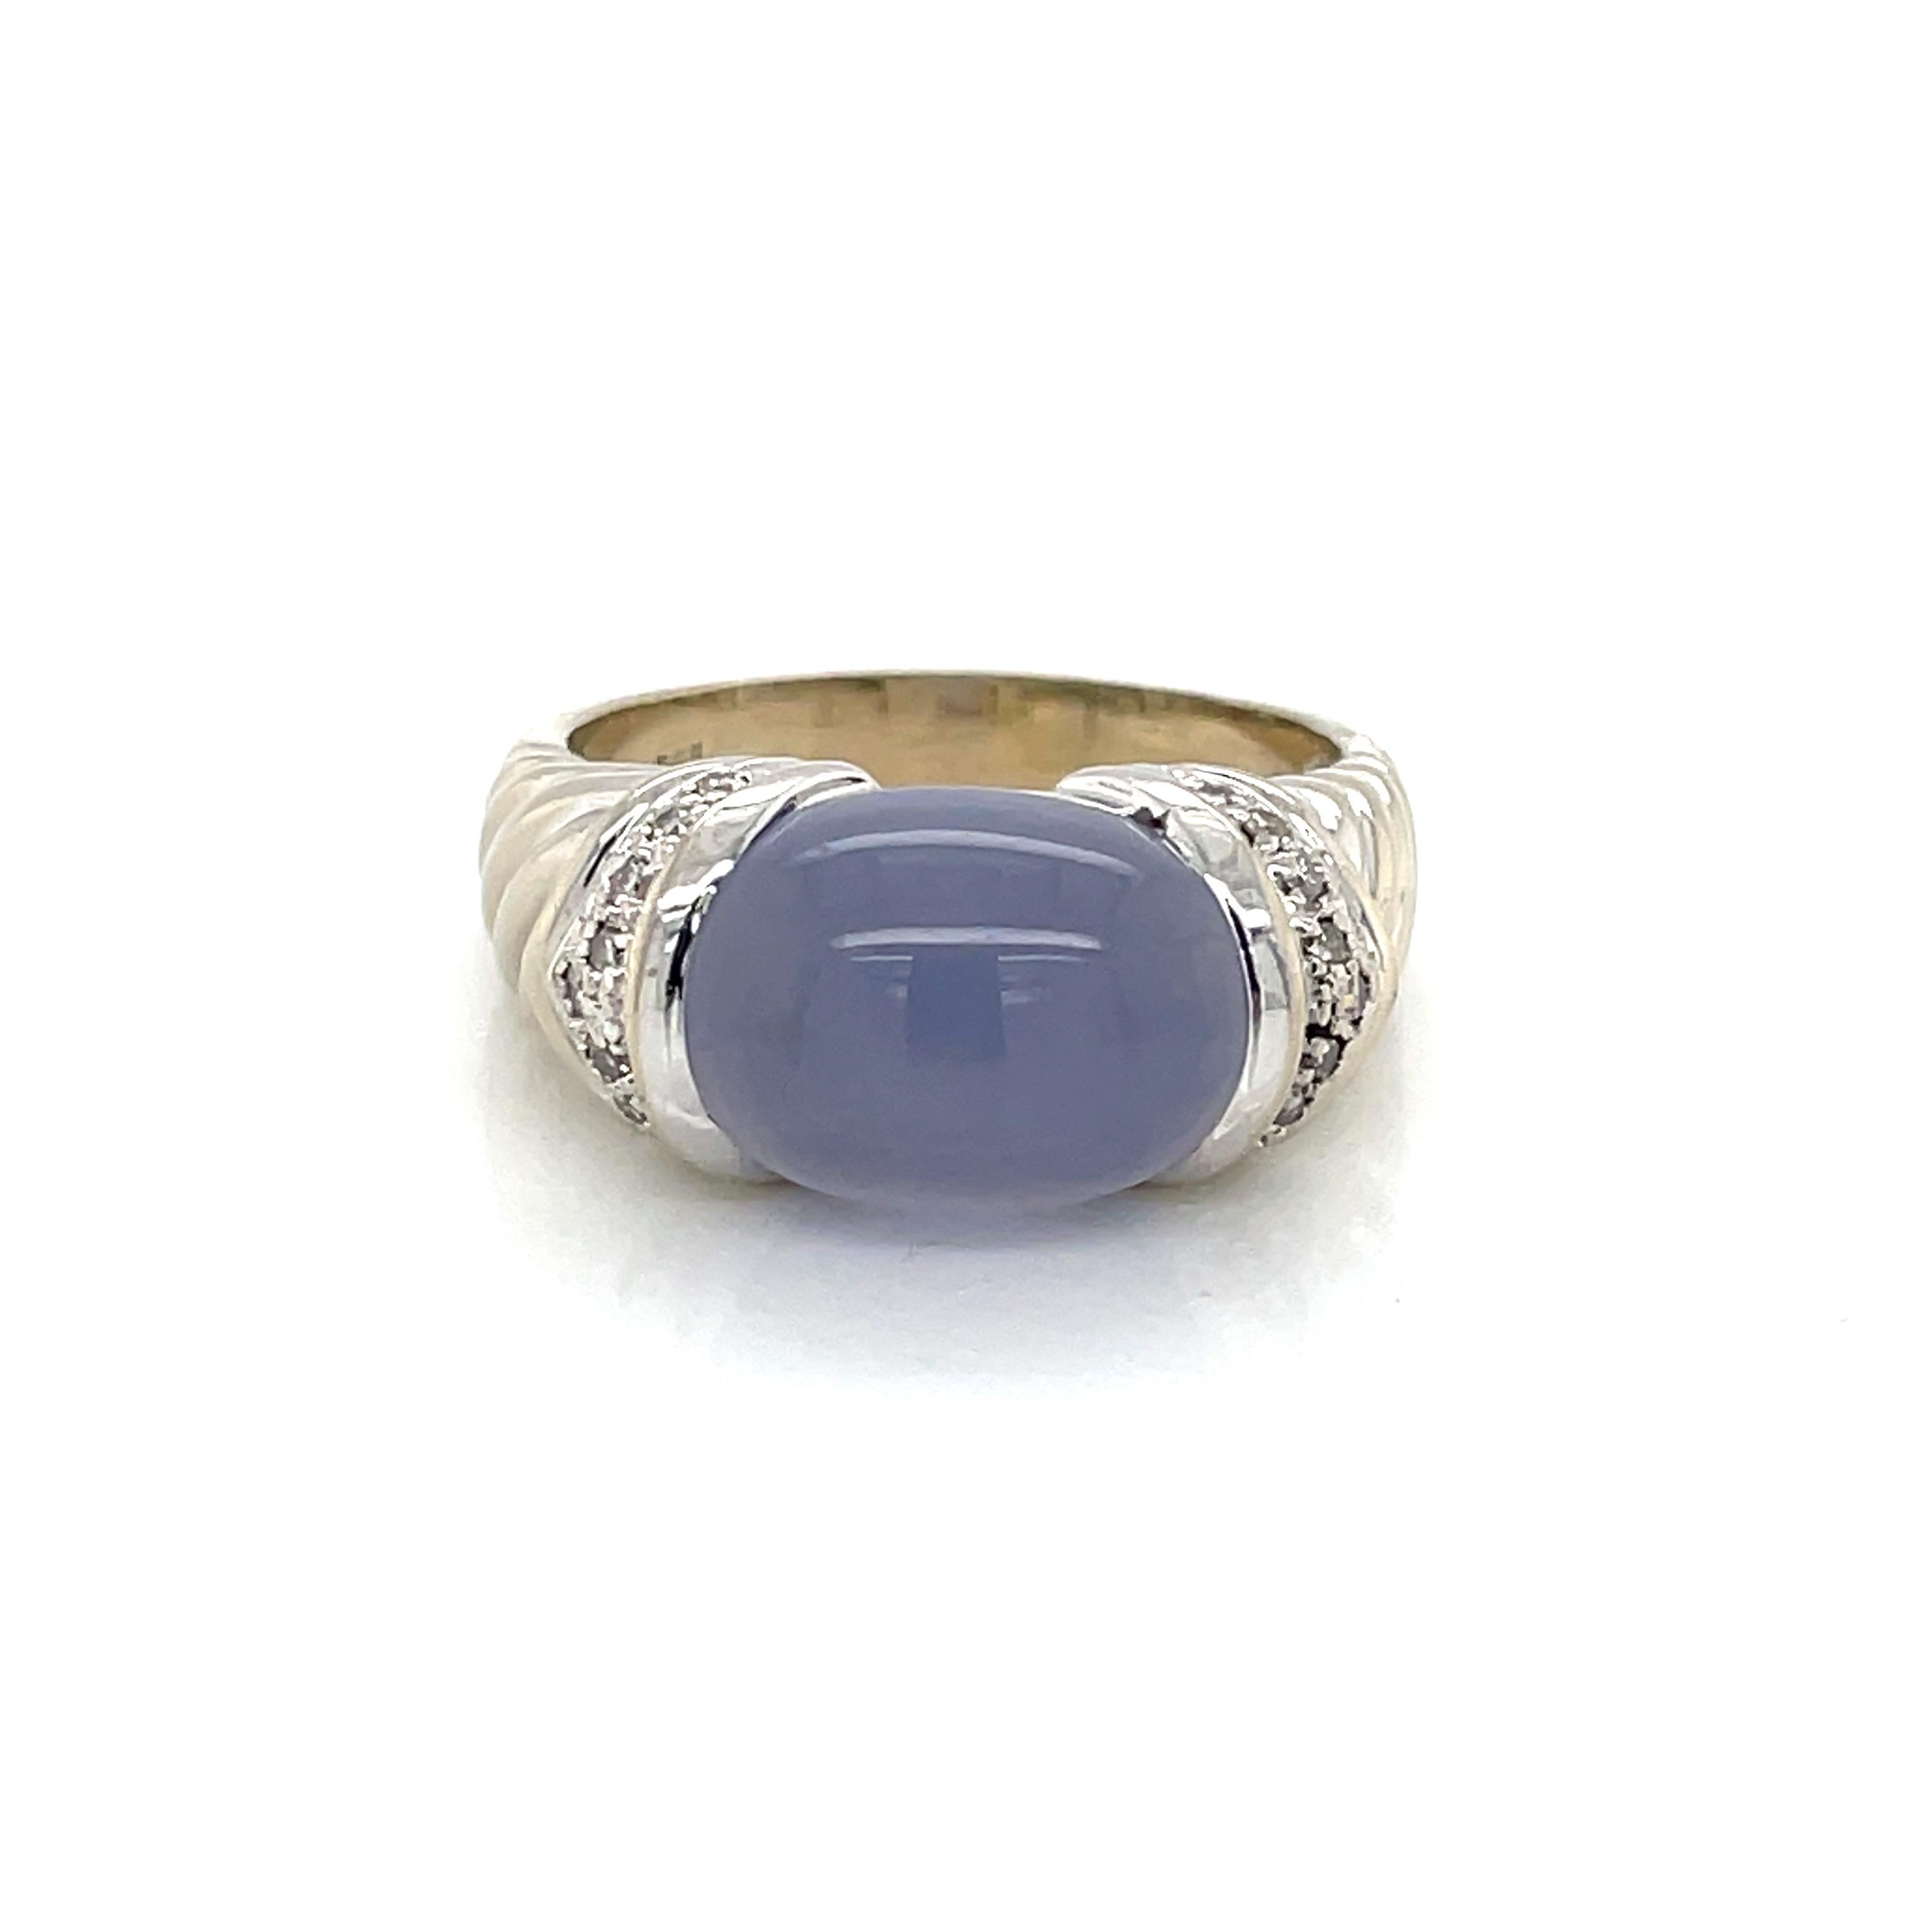 Hues of soft violet glow in chalcedony,  the feature of this dome style ring in fourteen karat 14K white gold. Diamond accents flank the soft colored stone and highlight the twist cable style ring shank as it graduates back. The gallery set oval